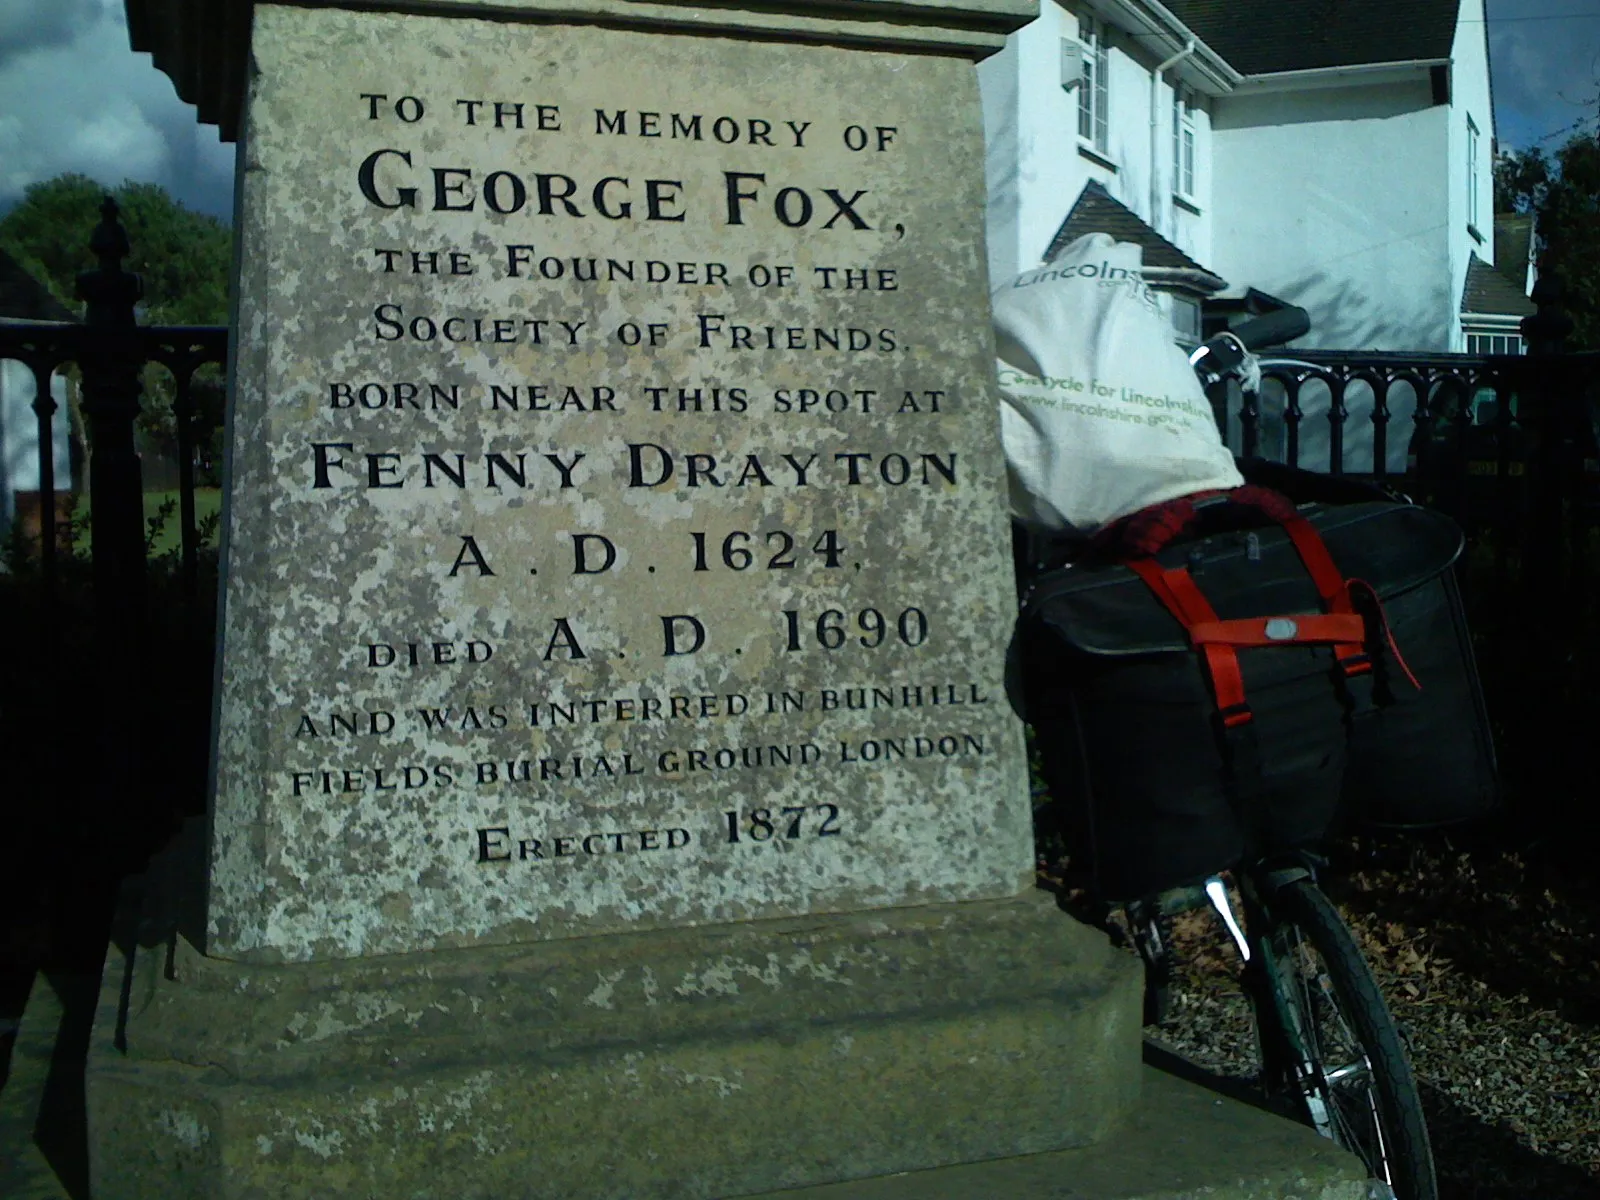 Photo showing: "to the memory of George Fox, the Founder of the Society of Friends.  Born near this spot at Fenny Drayton A.D. 1624, died A.D. 1690 and was interred in bunhill fields burialground london.  Erected 1872"